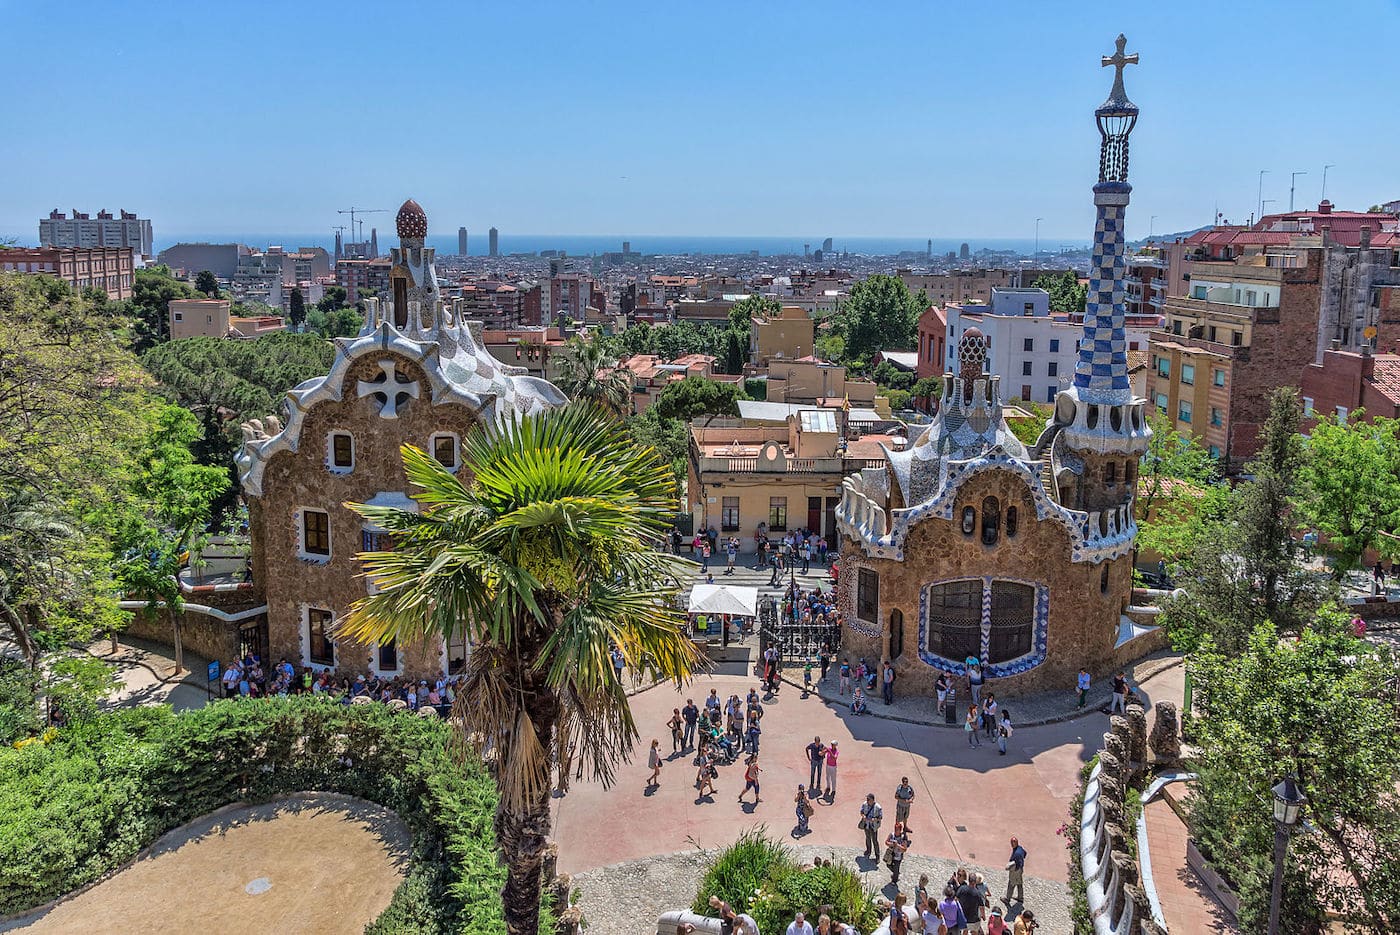 3. Best Parks to visit in Barcelona - Park Guell